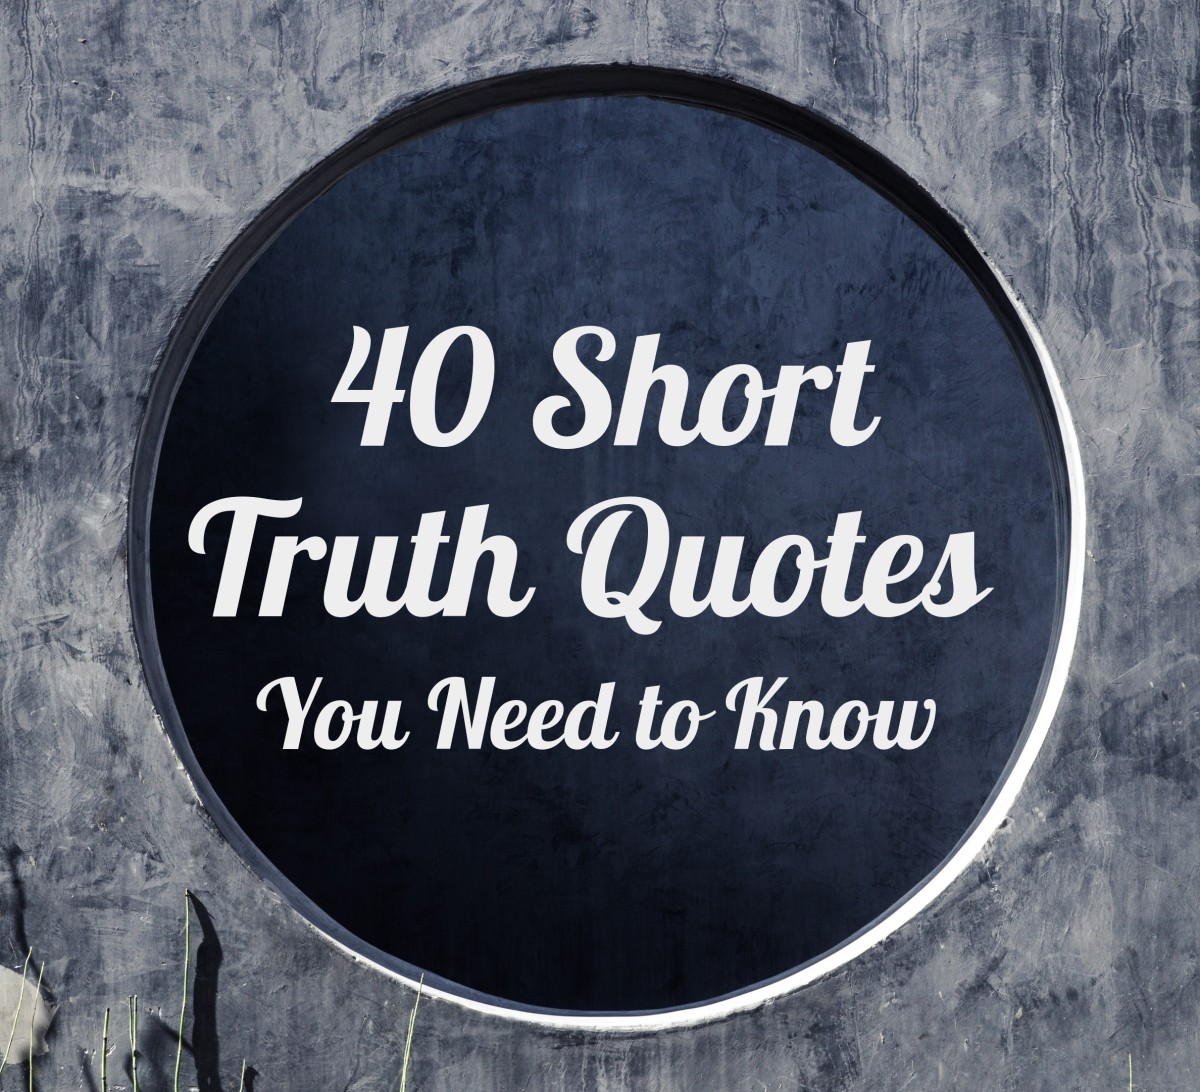 40 Short Truth Quotes You Need to Know